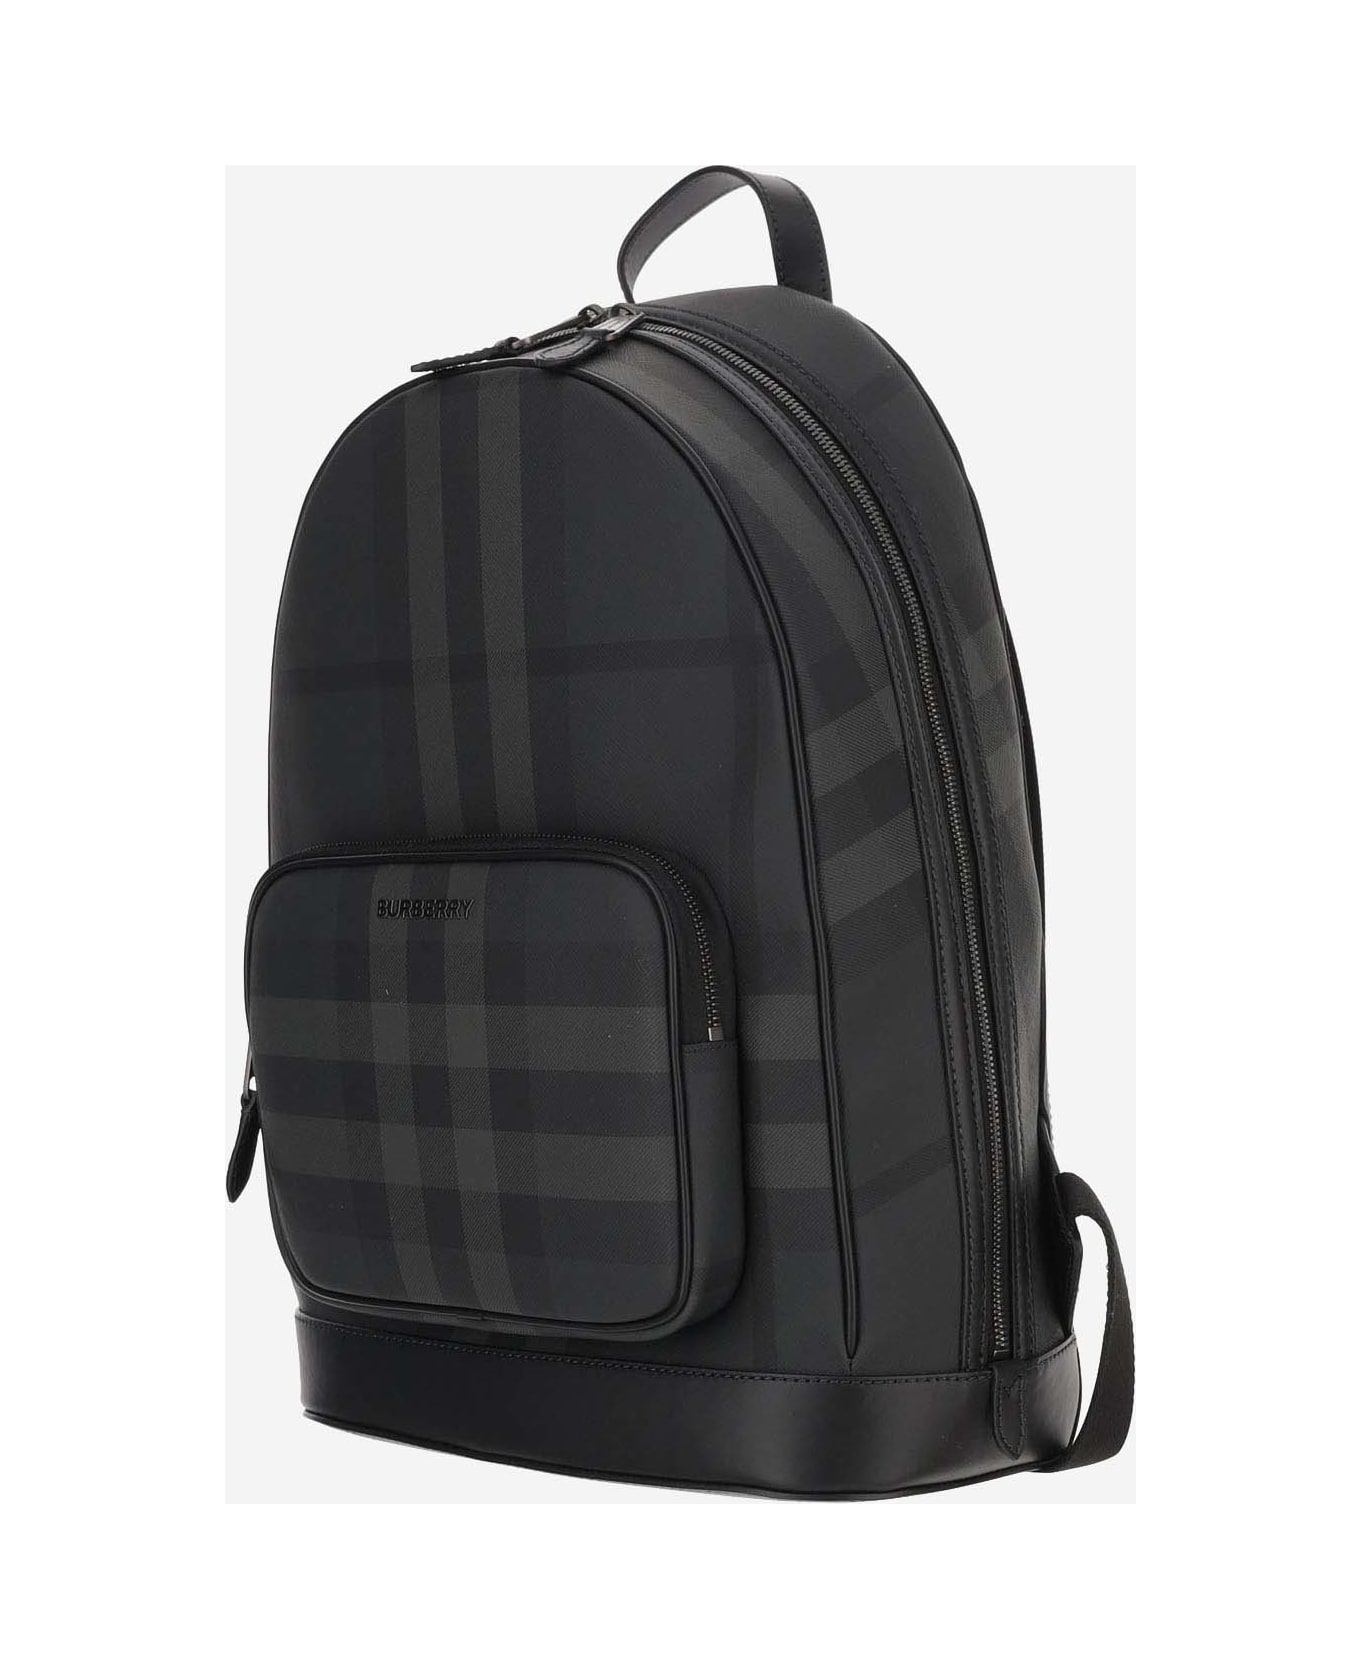 Burberry Rocco Backpack With Check Pattern - Charcoal